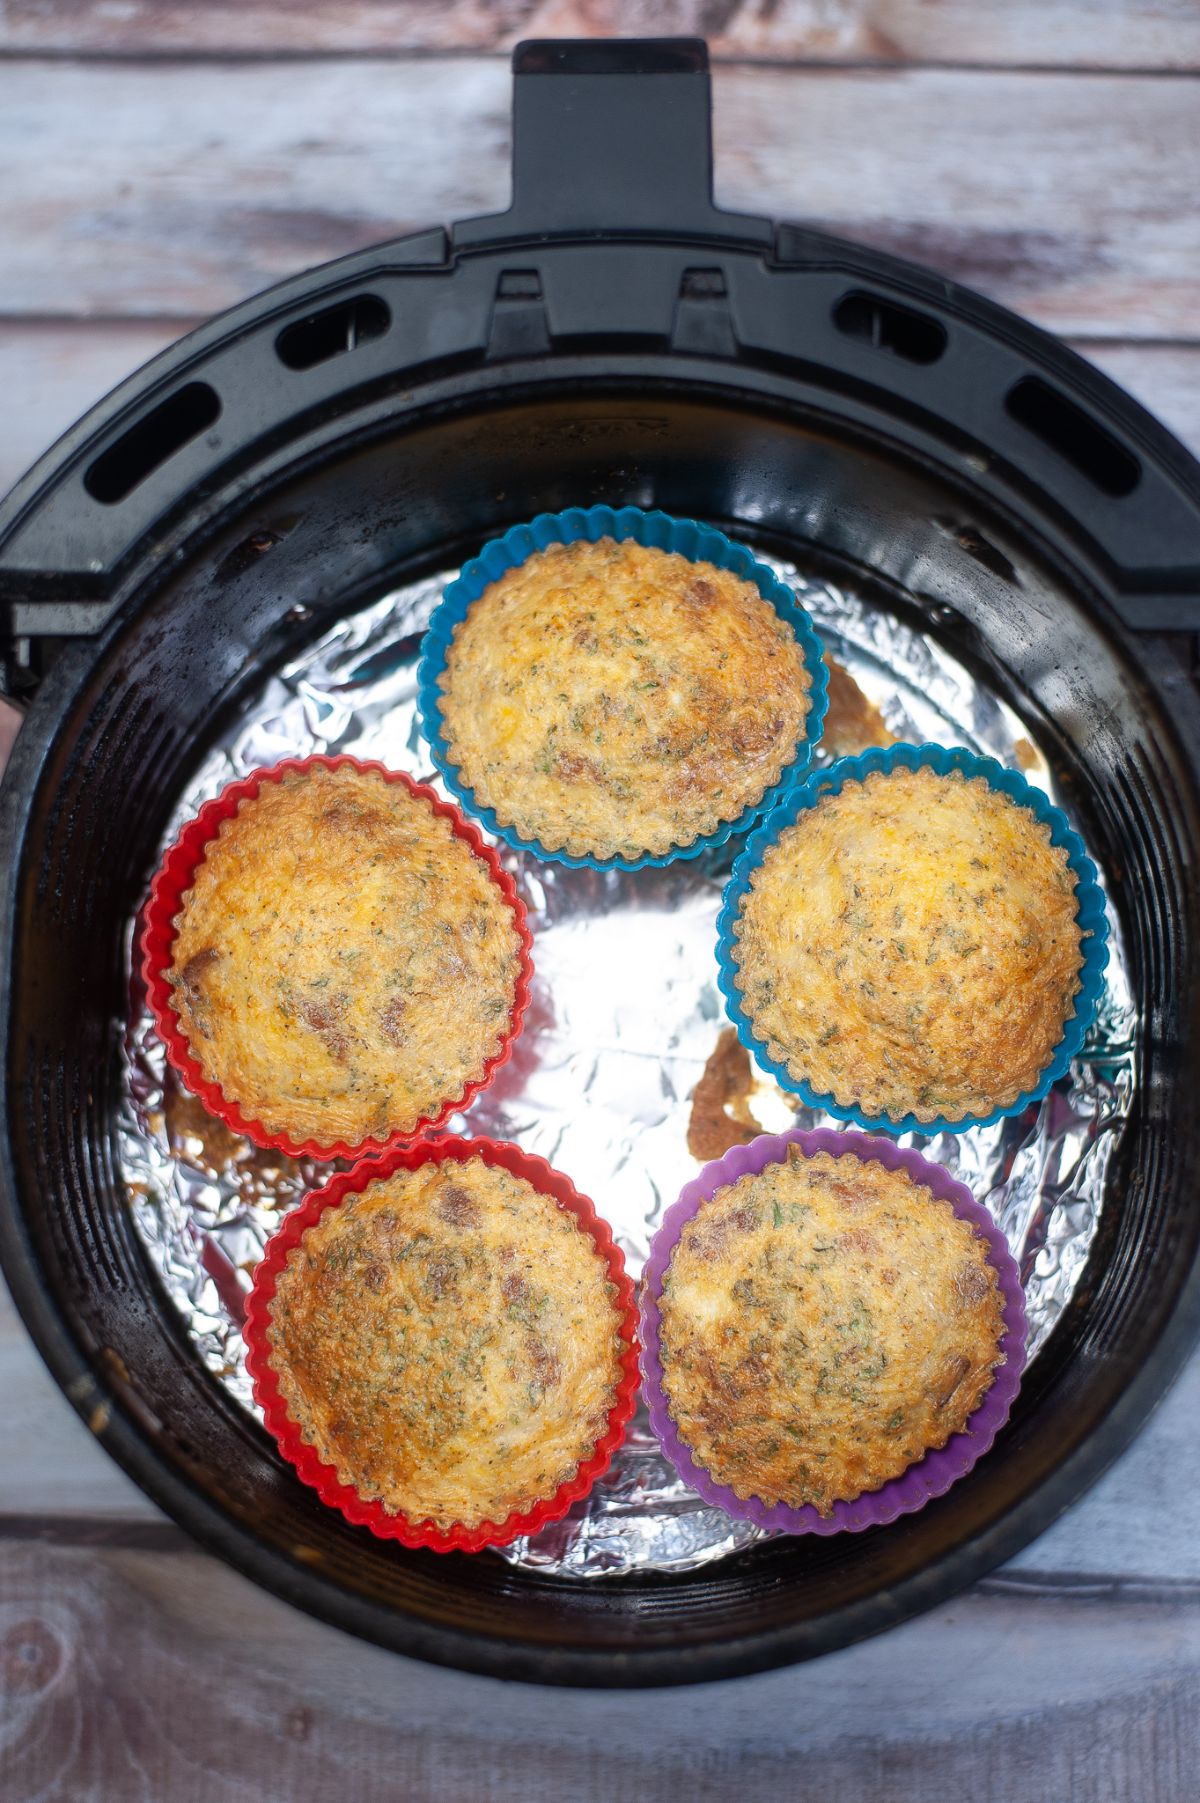 Air fry the egg cupcakes